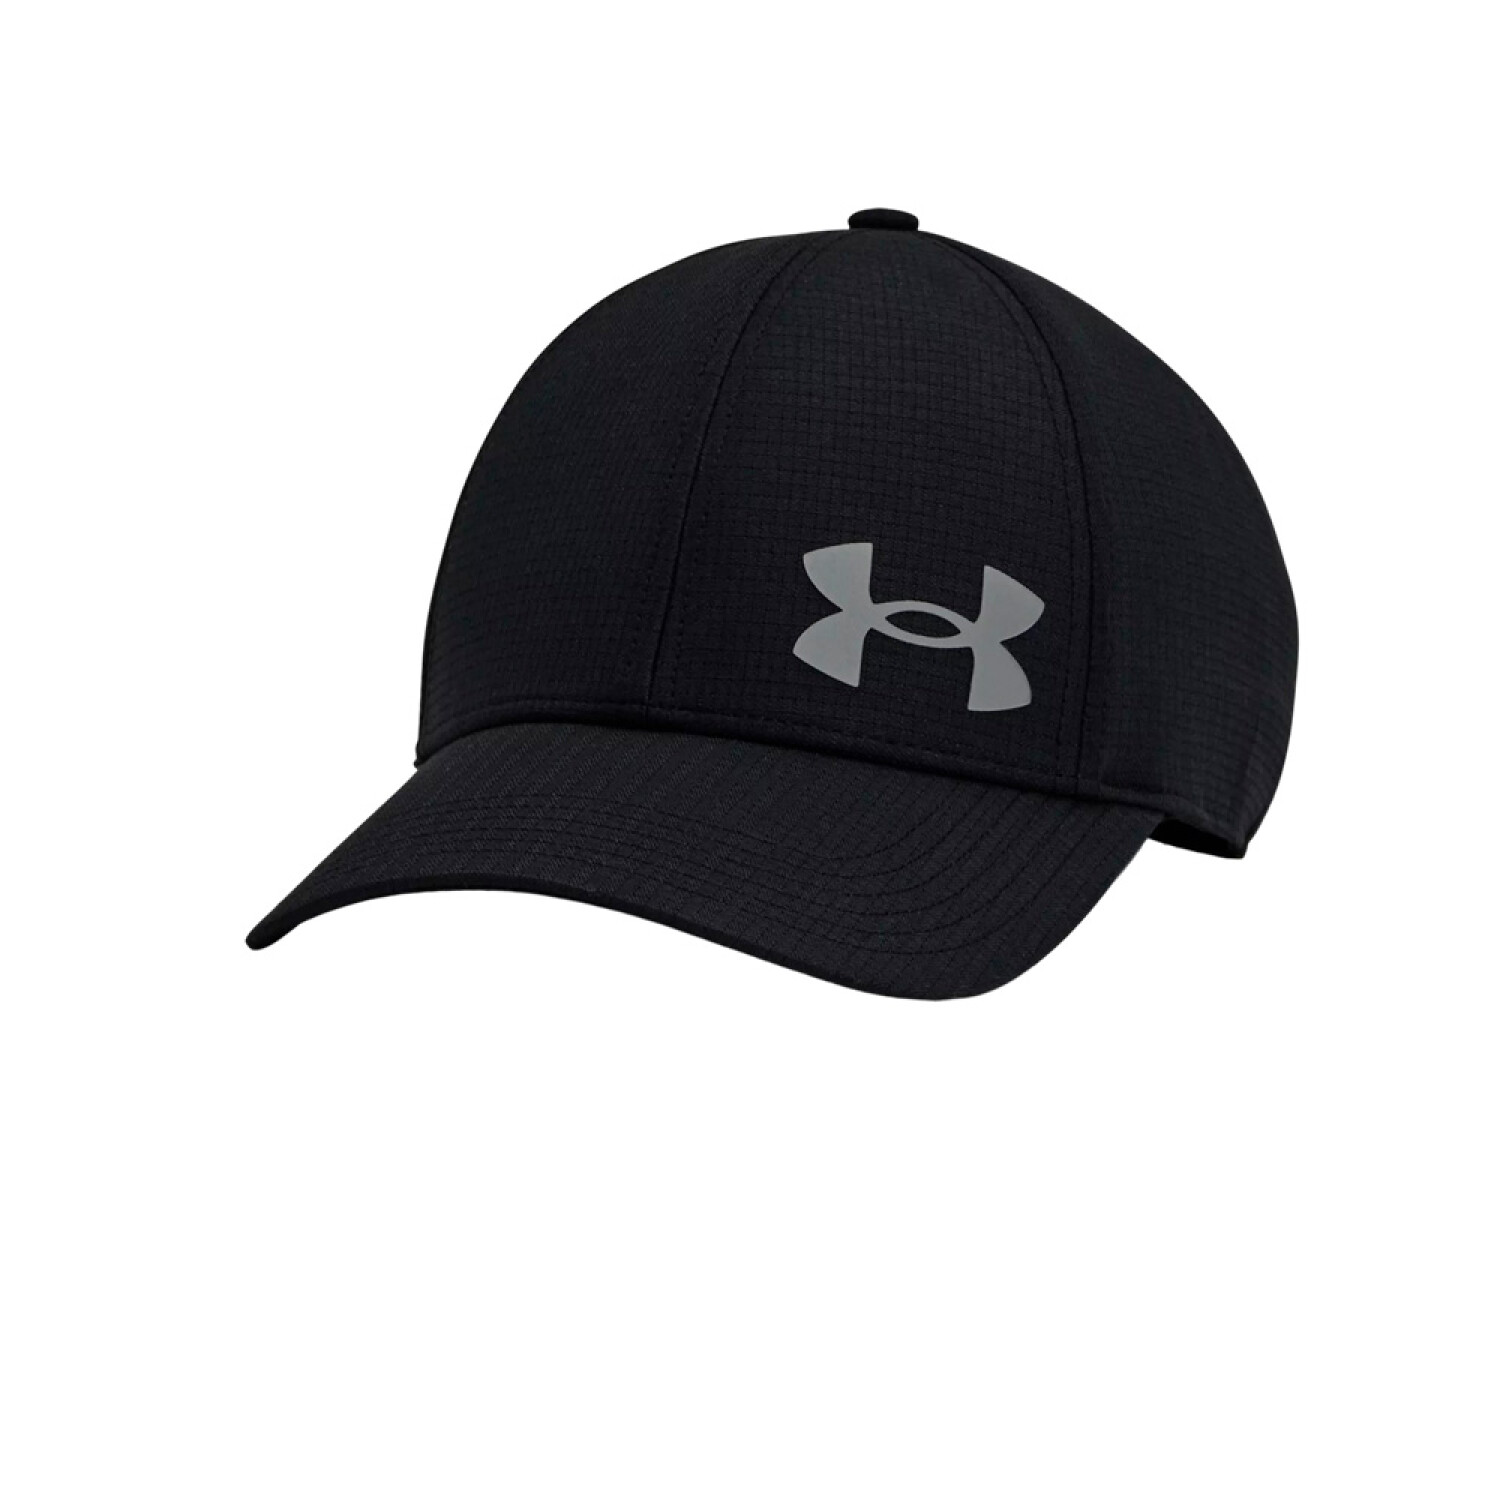 GORRA UNDER CHILL VENT - Global Sports